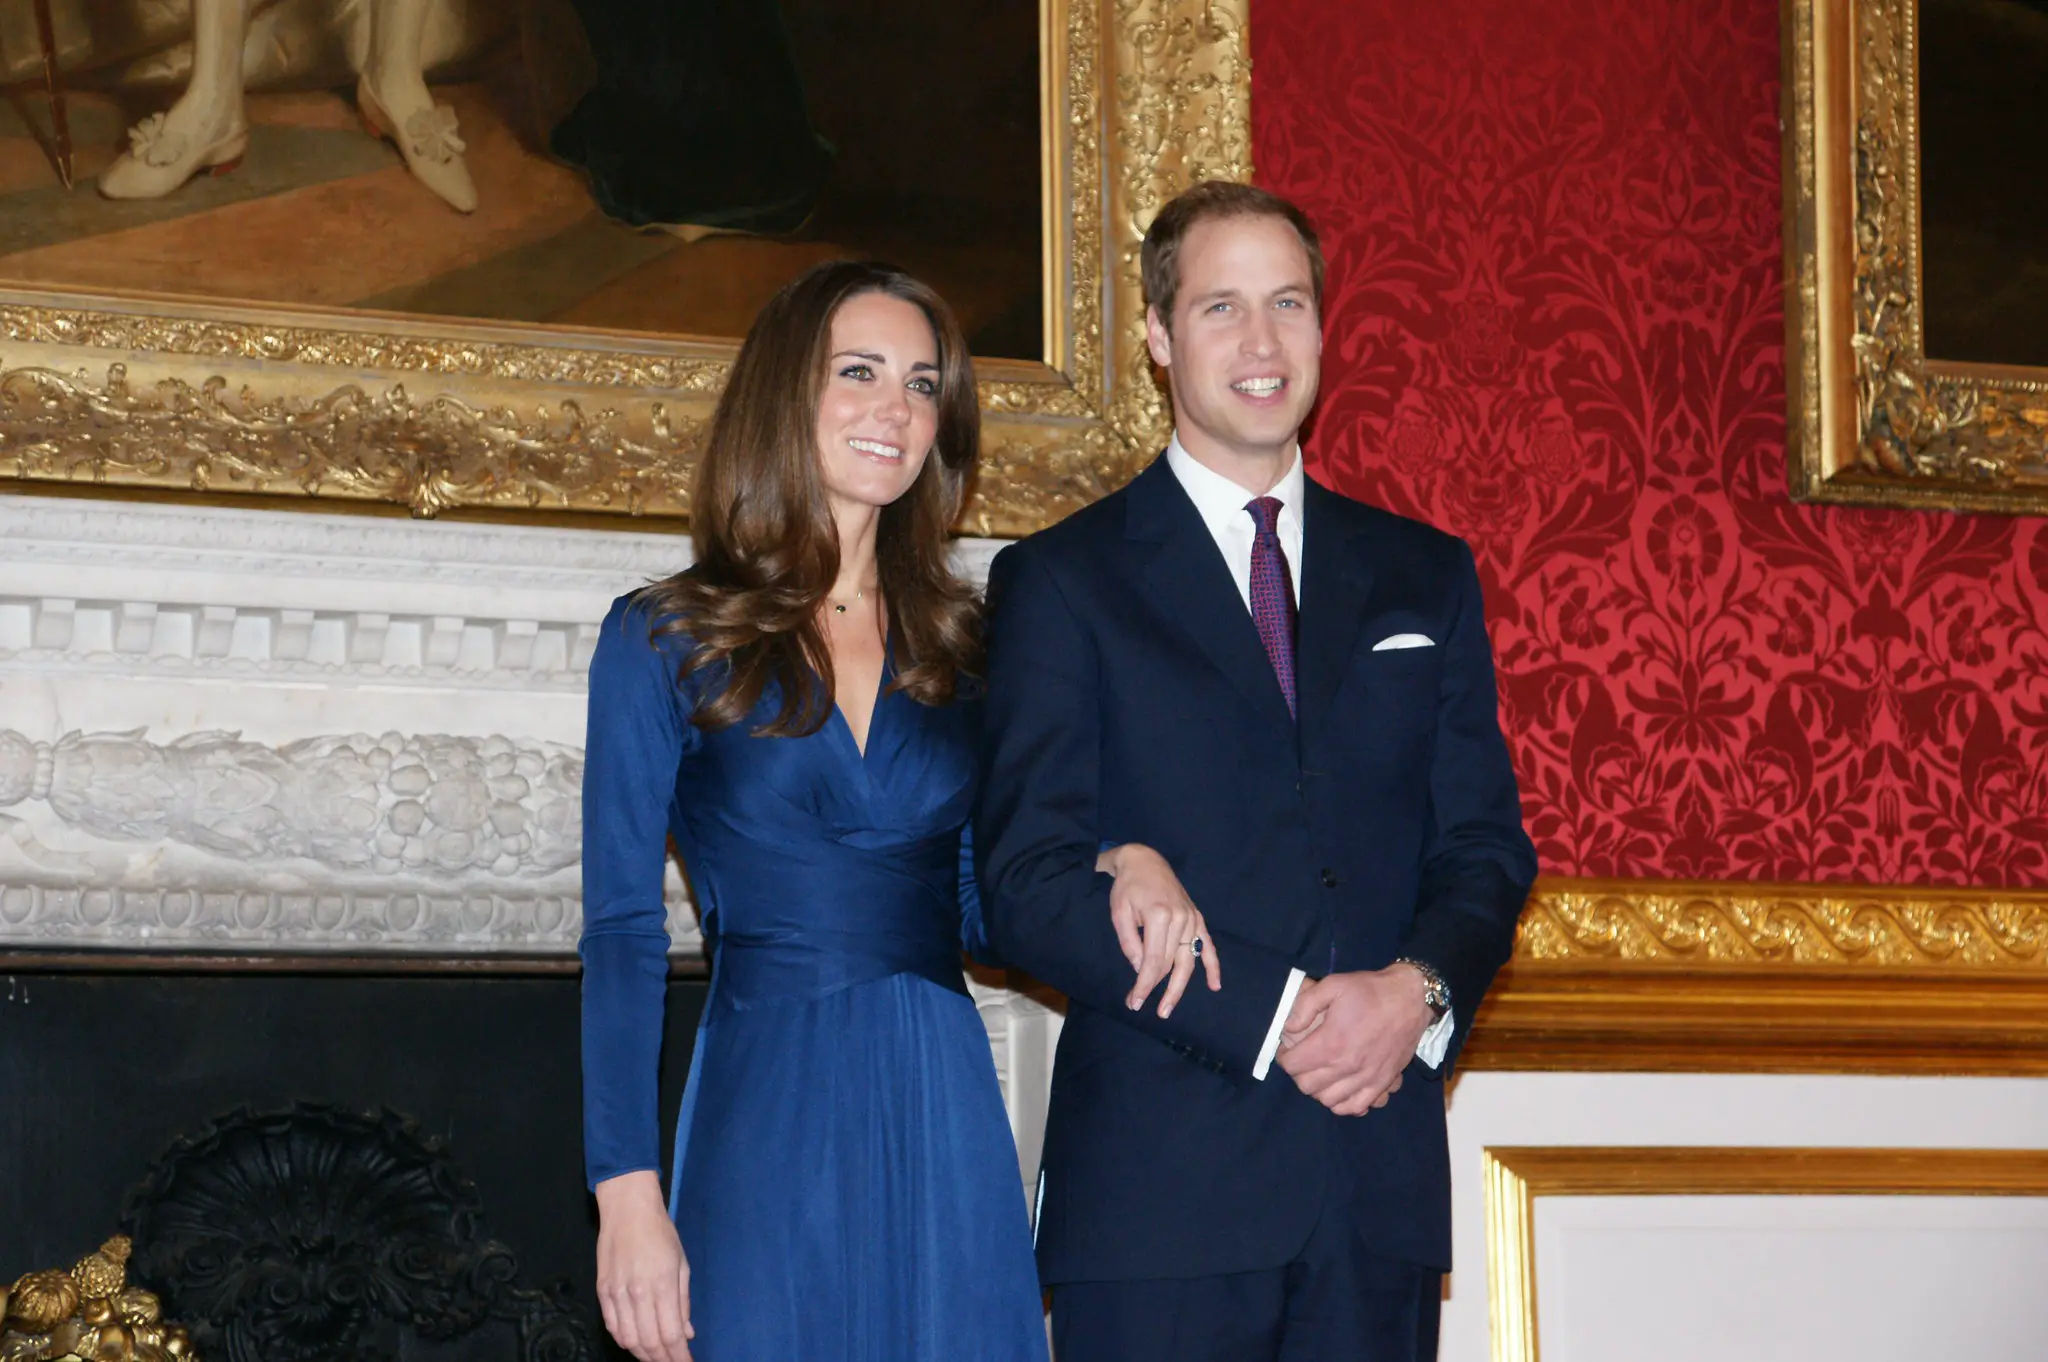 Prince William and Kate Middleon announced their engagement on November 16 2010 at St. James Palace in London